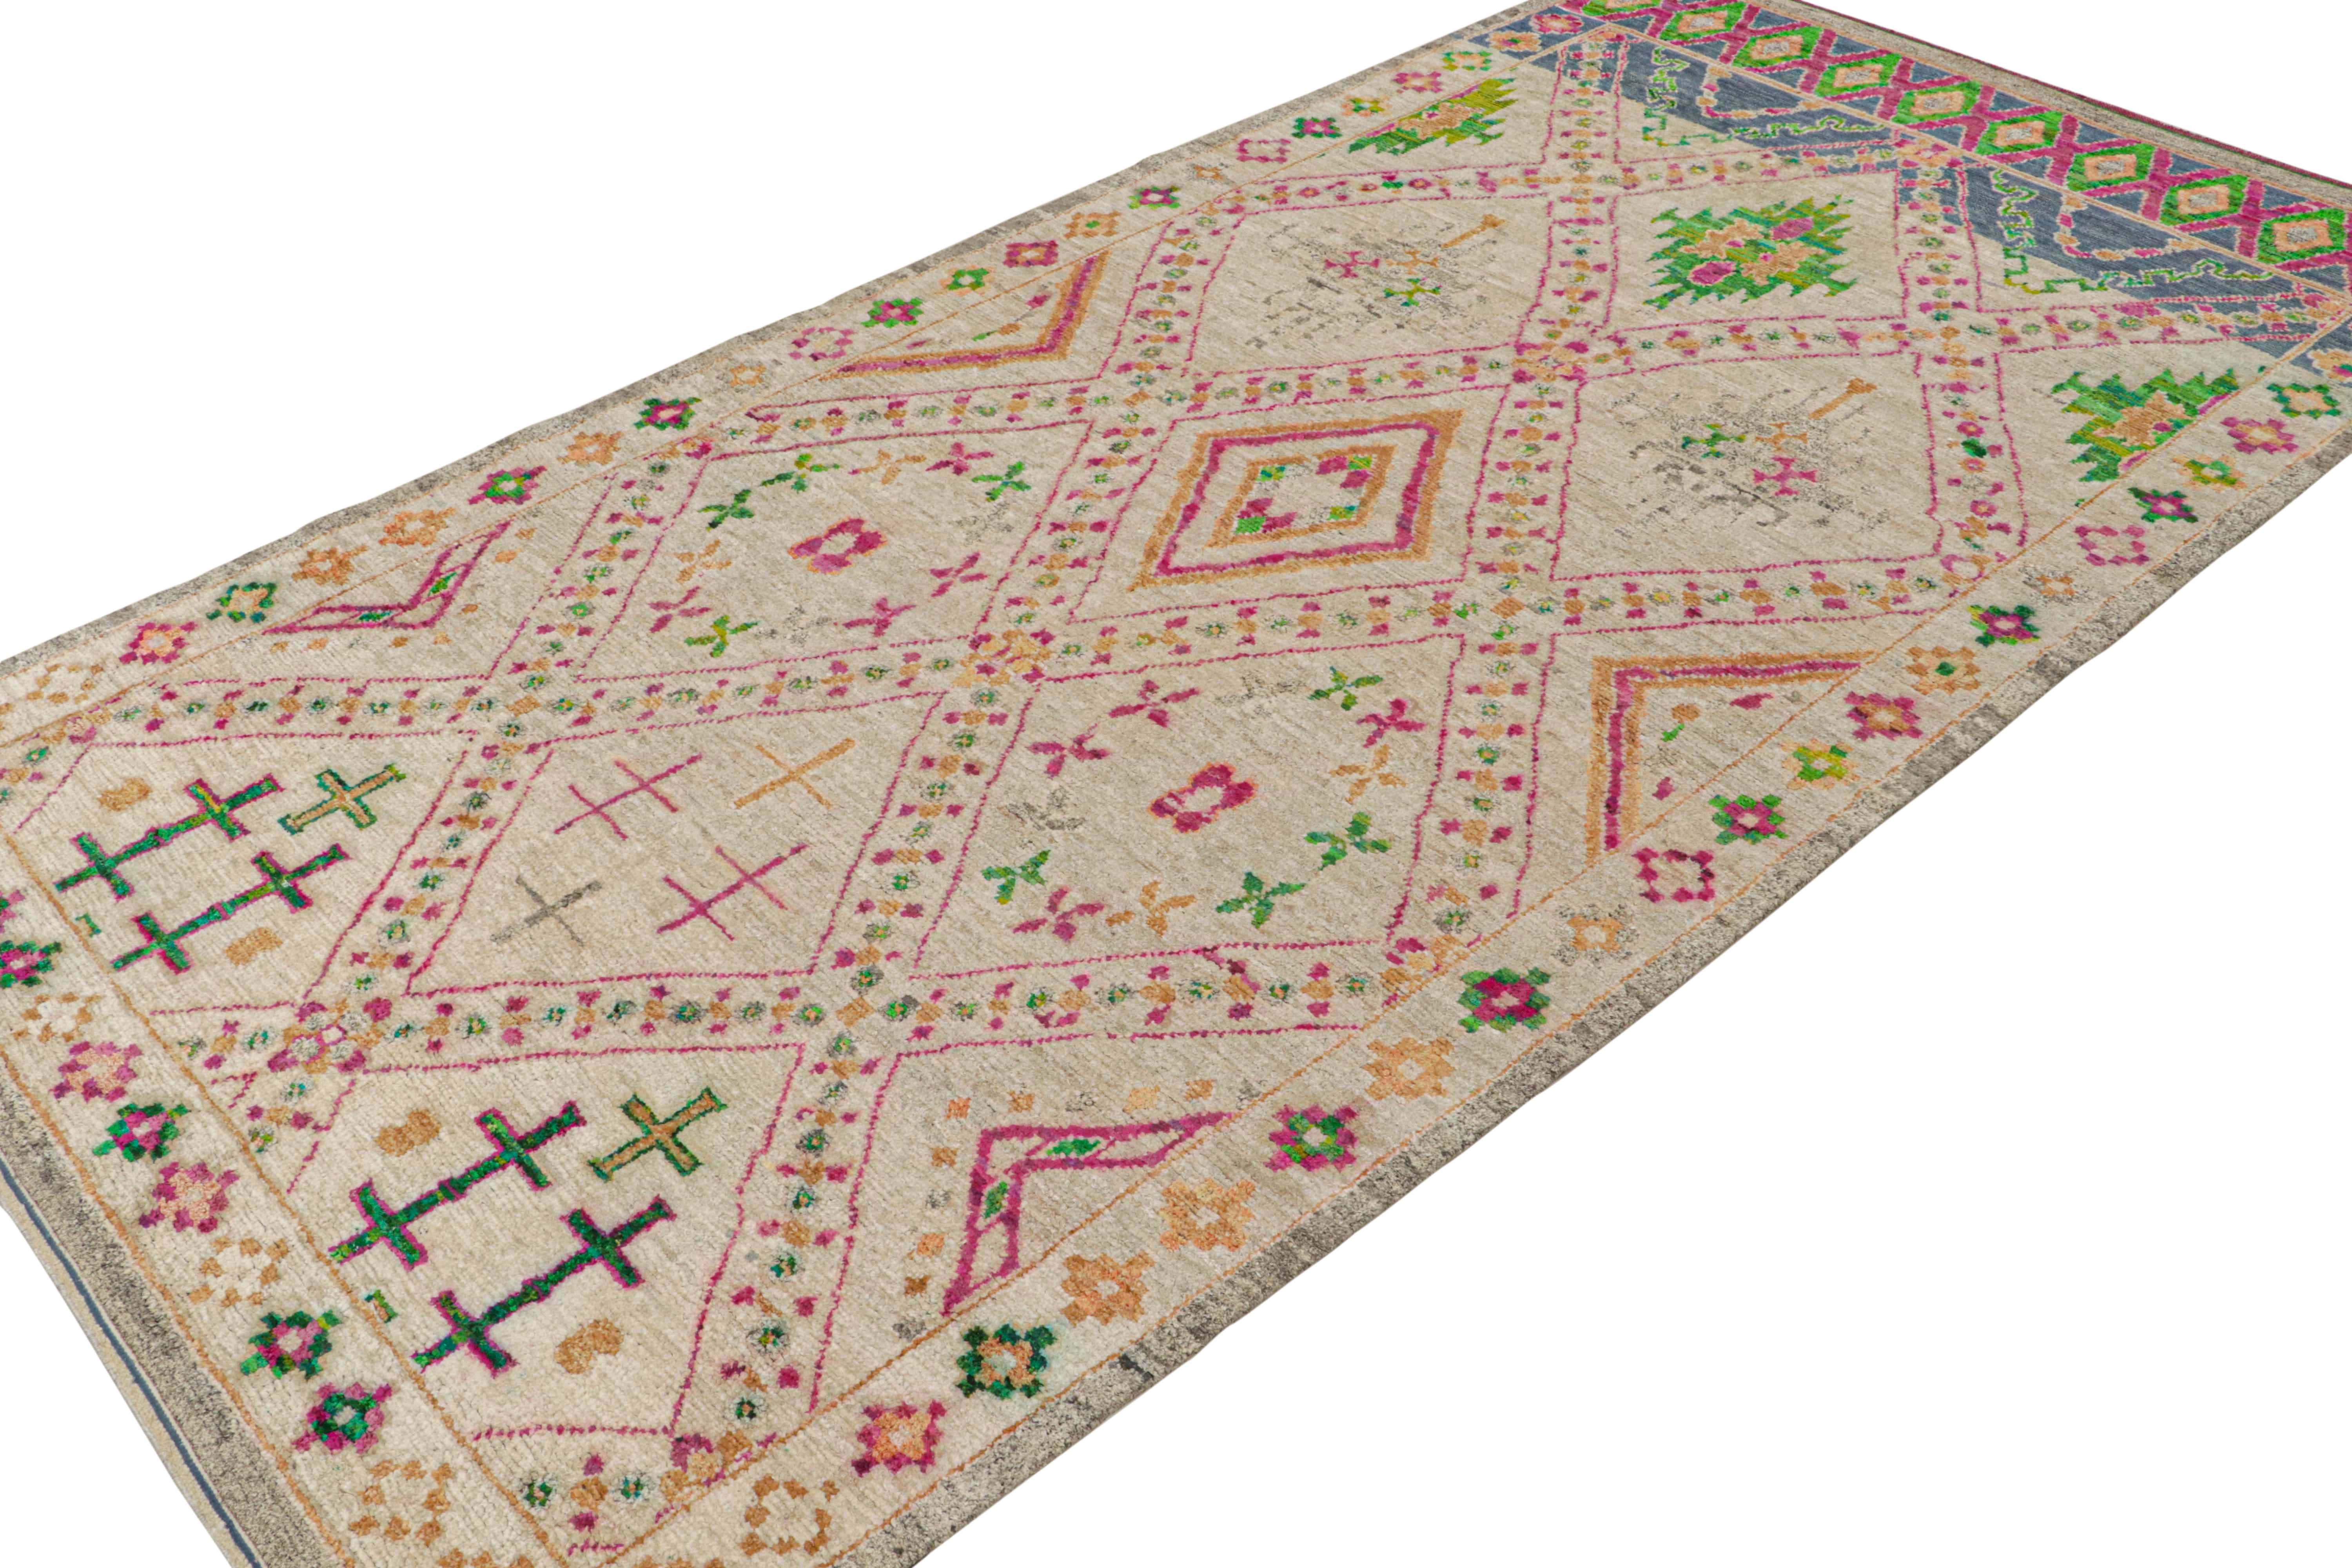 Tribal Rug & Kilim’s Moroccan Style Rug in Beige with Vibrant Geometric Patterns For Sale